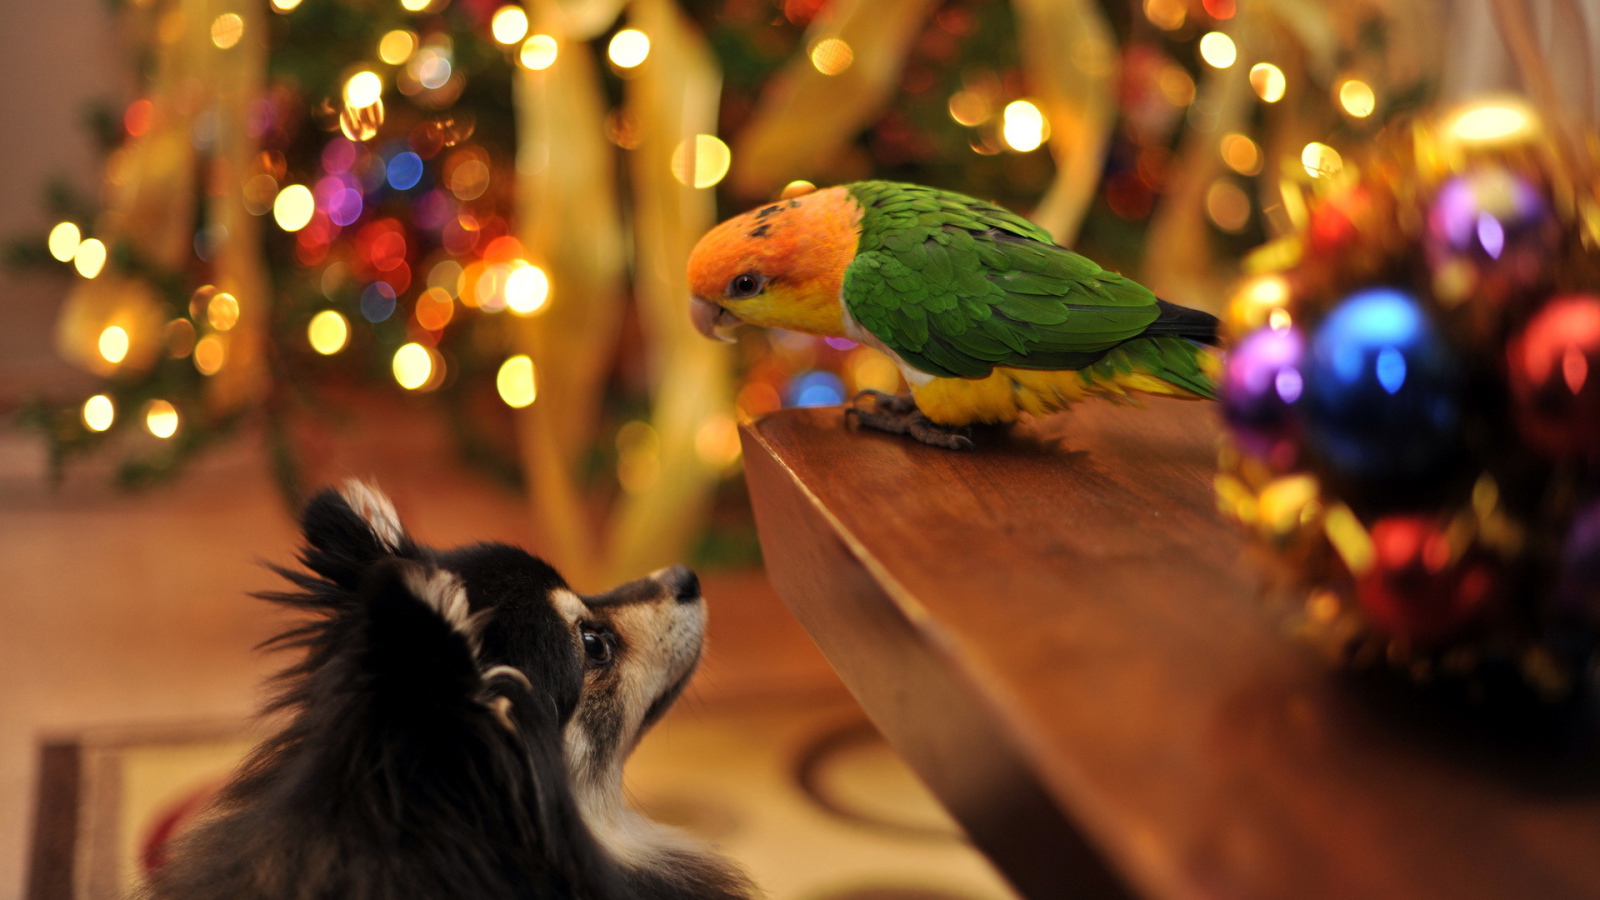 The dog and parrot Christmas meet